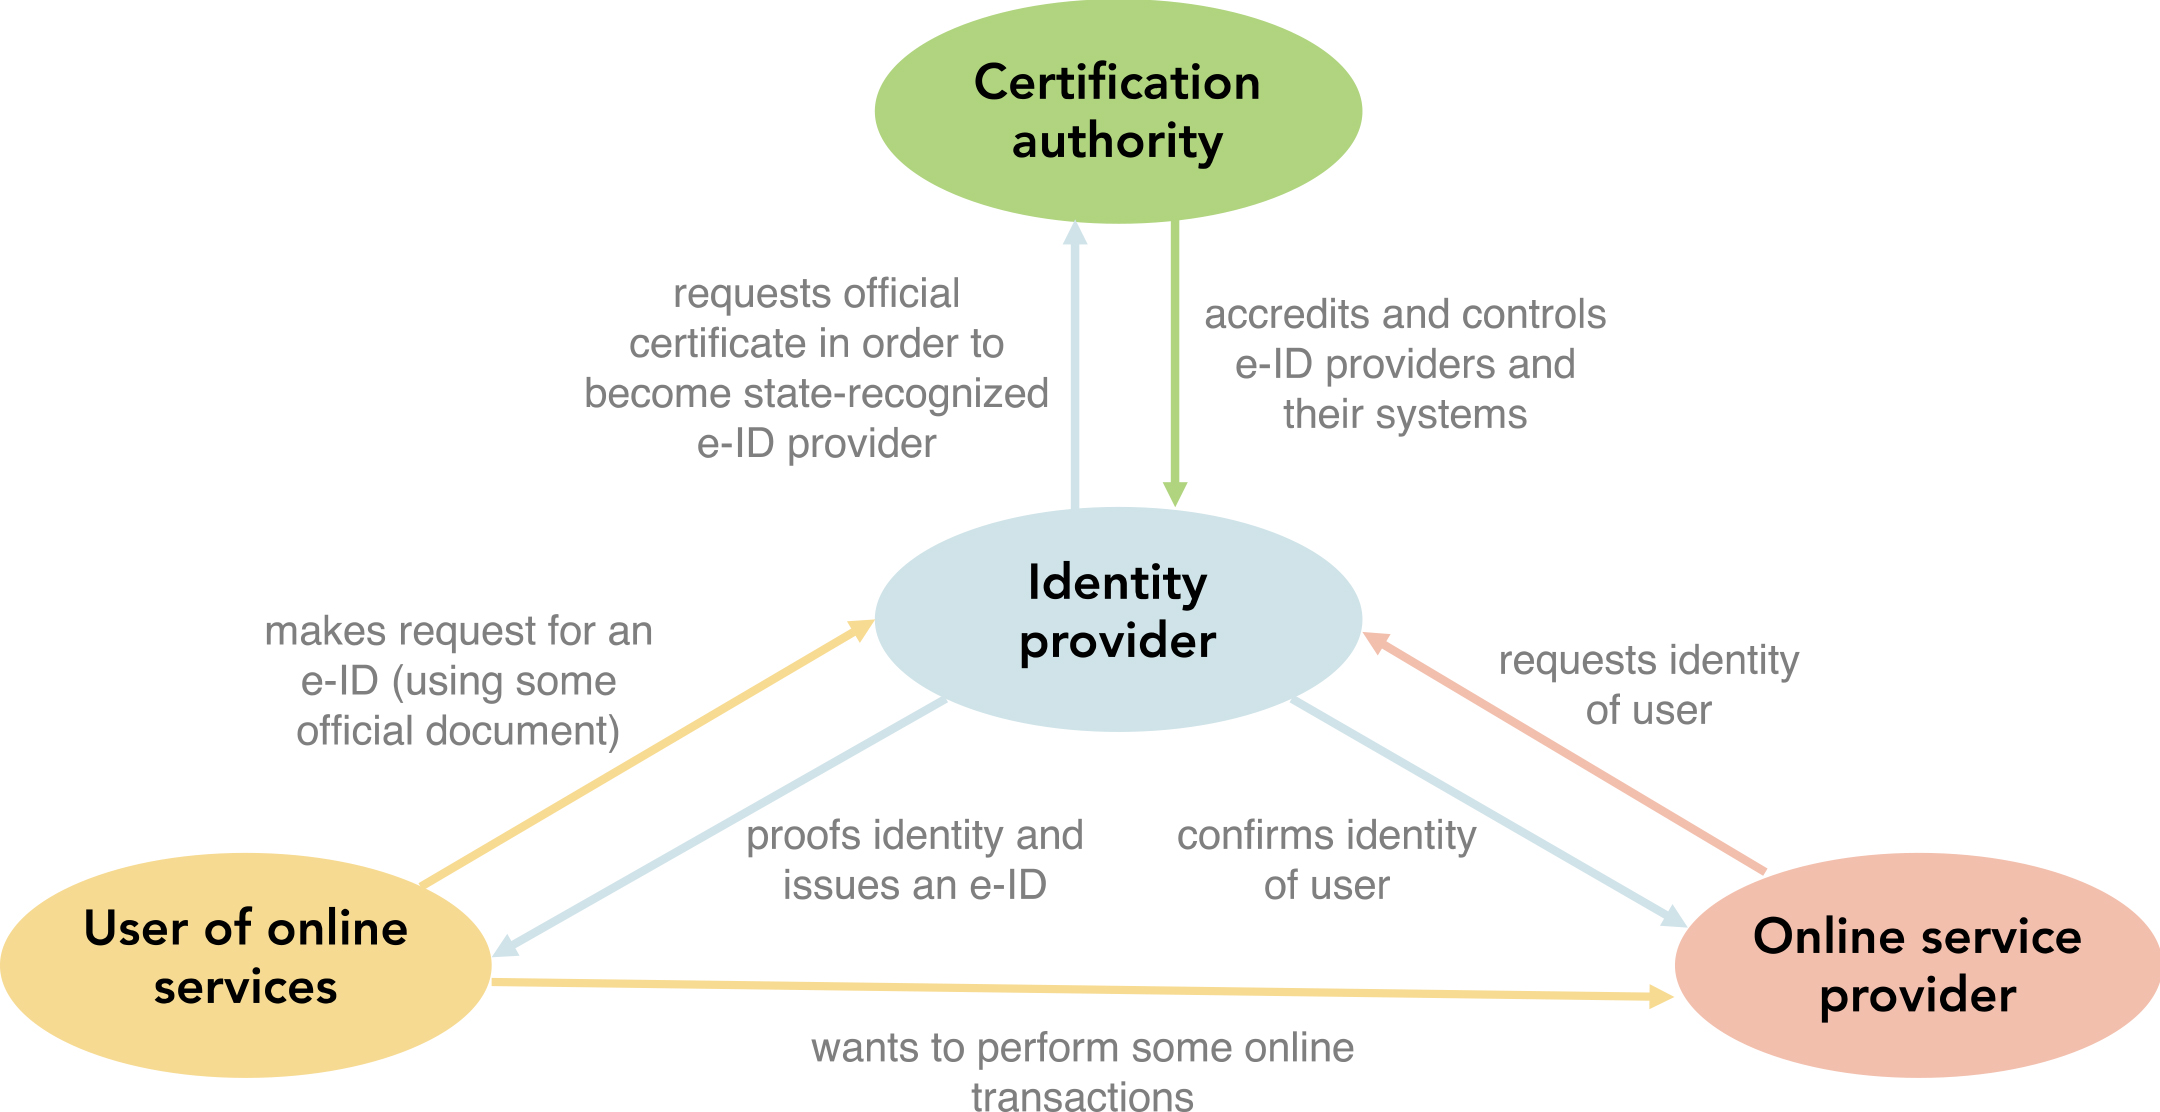 Actors and activities in a state-recognized e-credentials market.